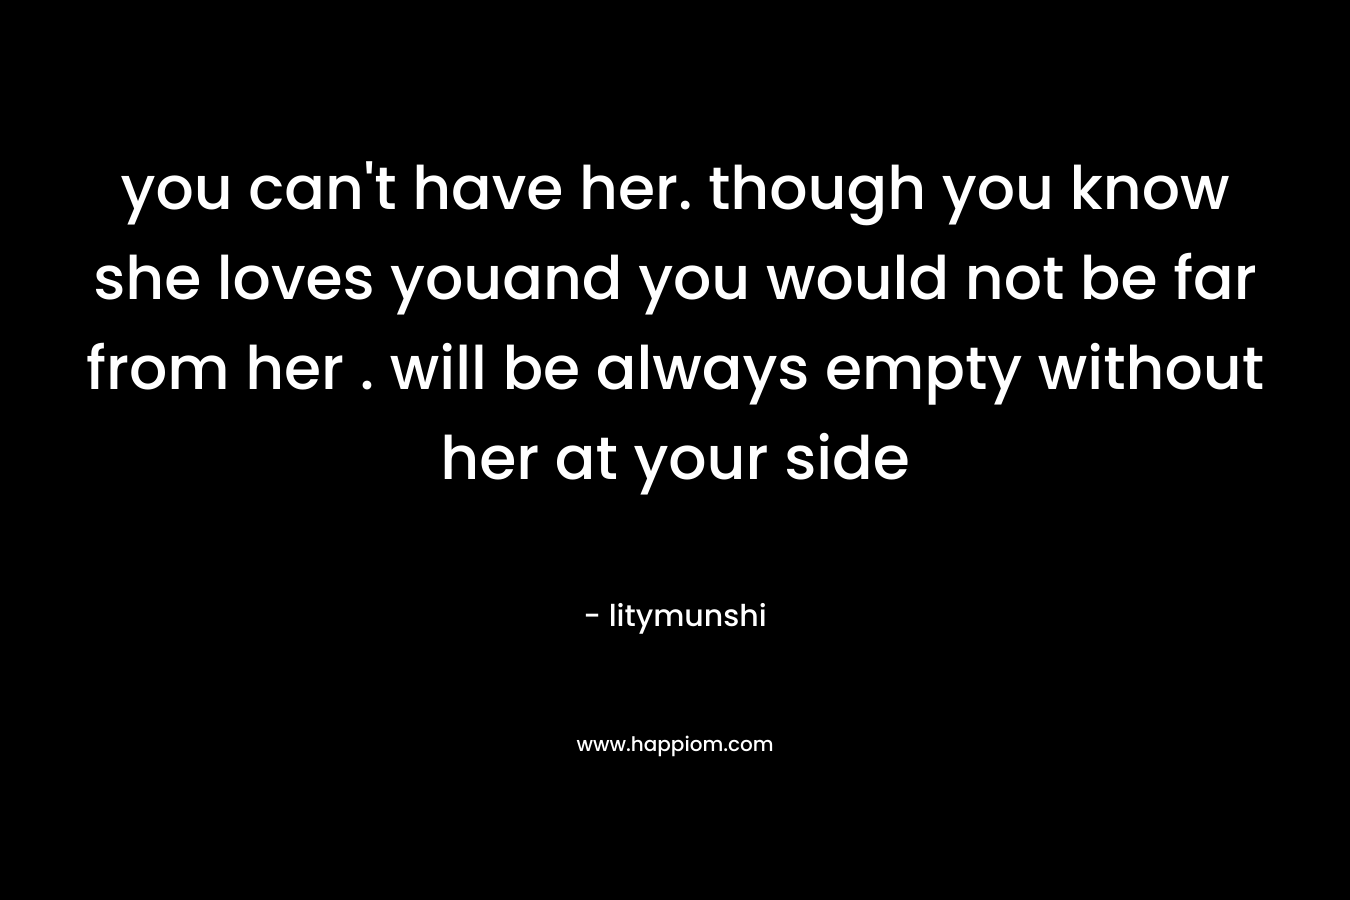 you can't have her. though you know she loves youand you would not be far from her . will be always empty without her at your side